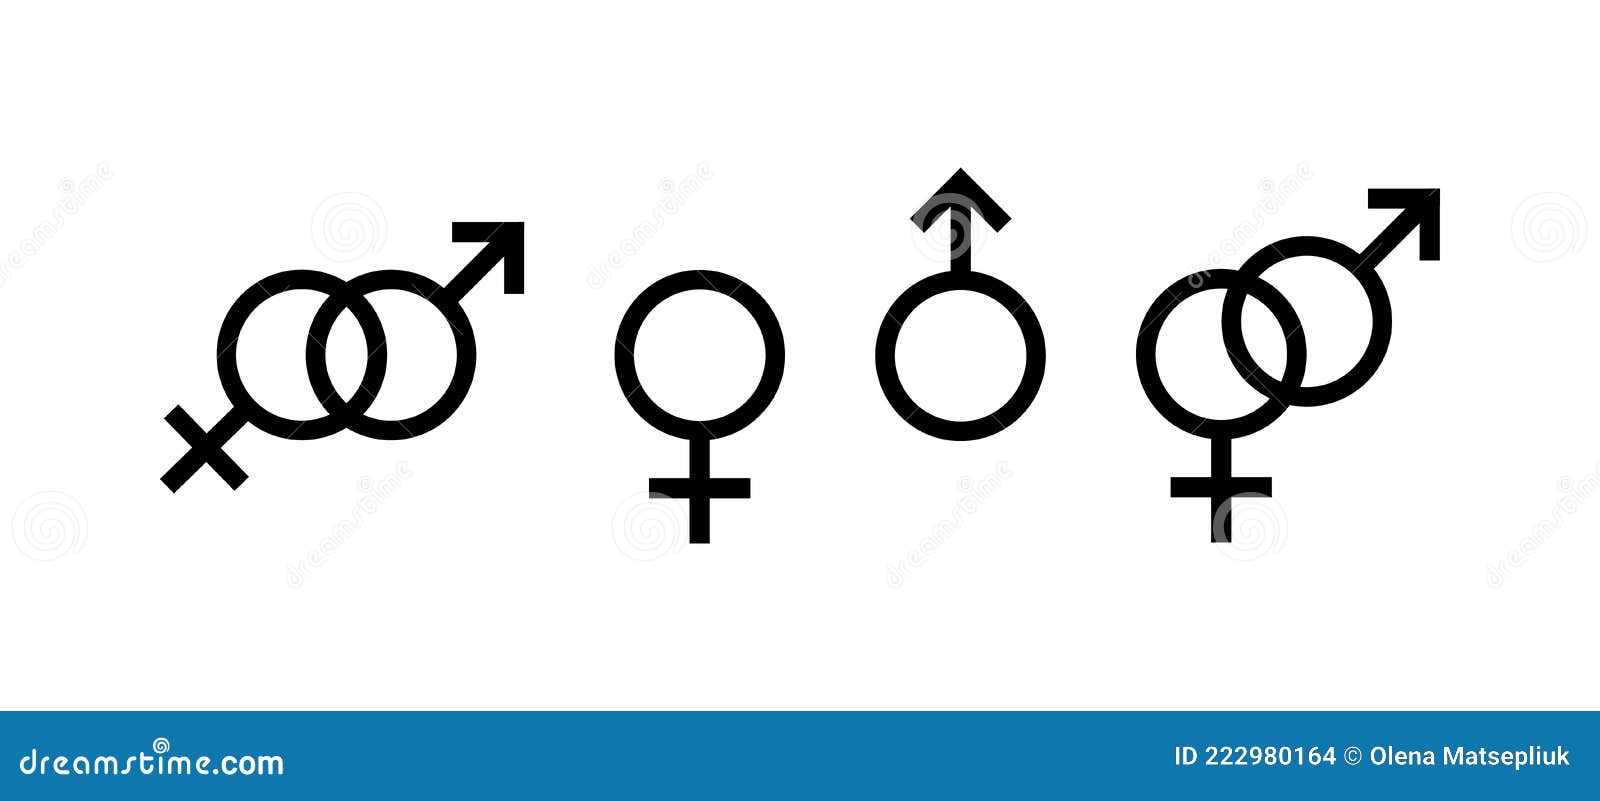 female gender, male gender. set of black icons, gender sign or . astronomy, adchemy, heterosexuality